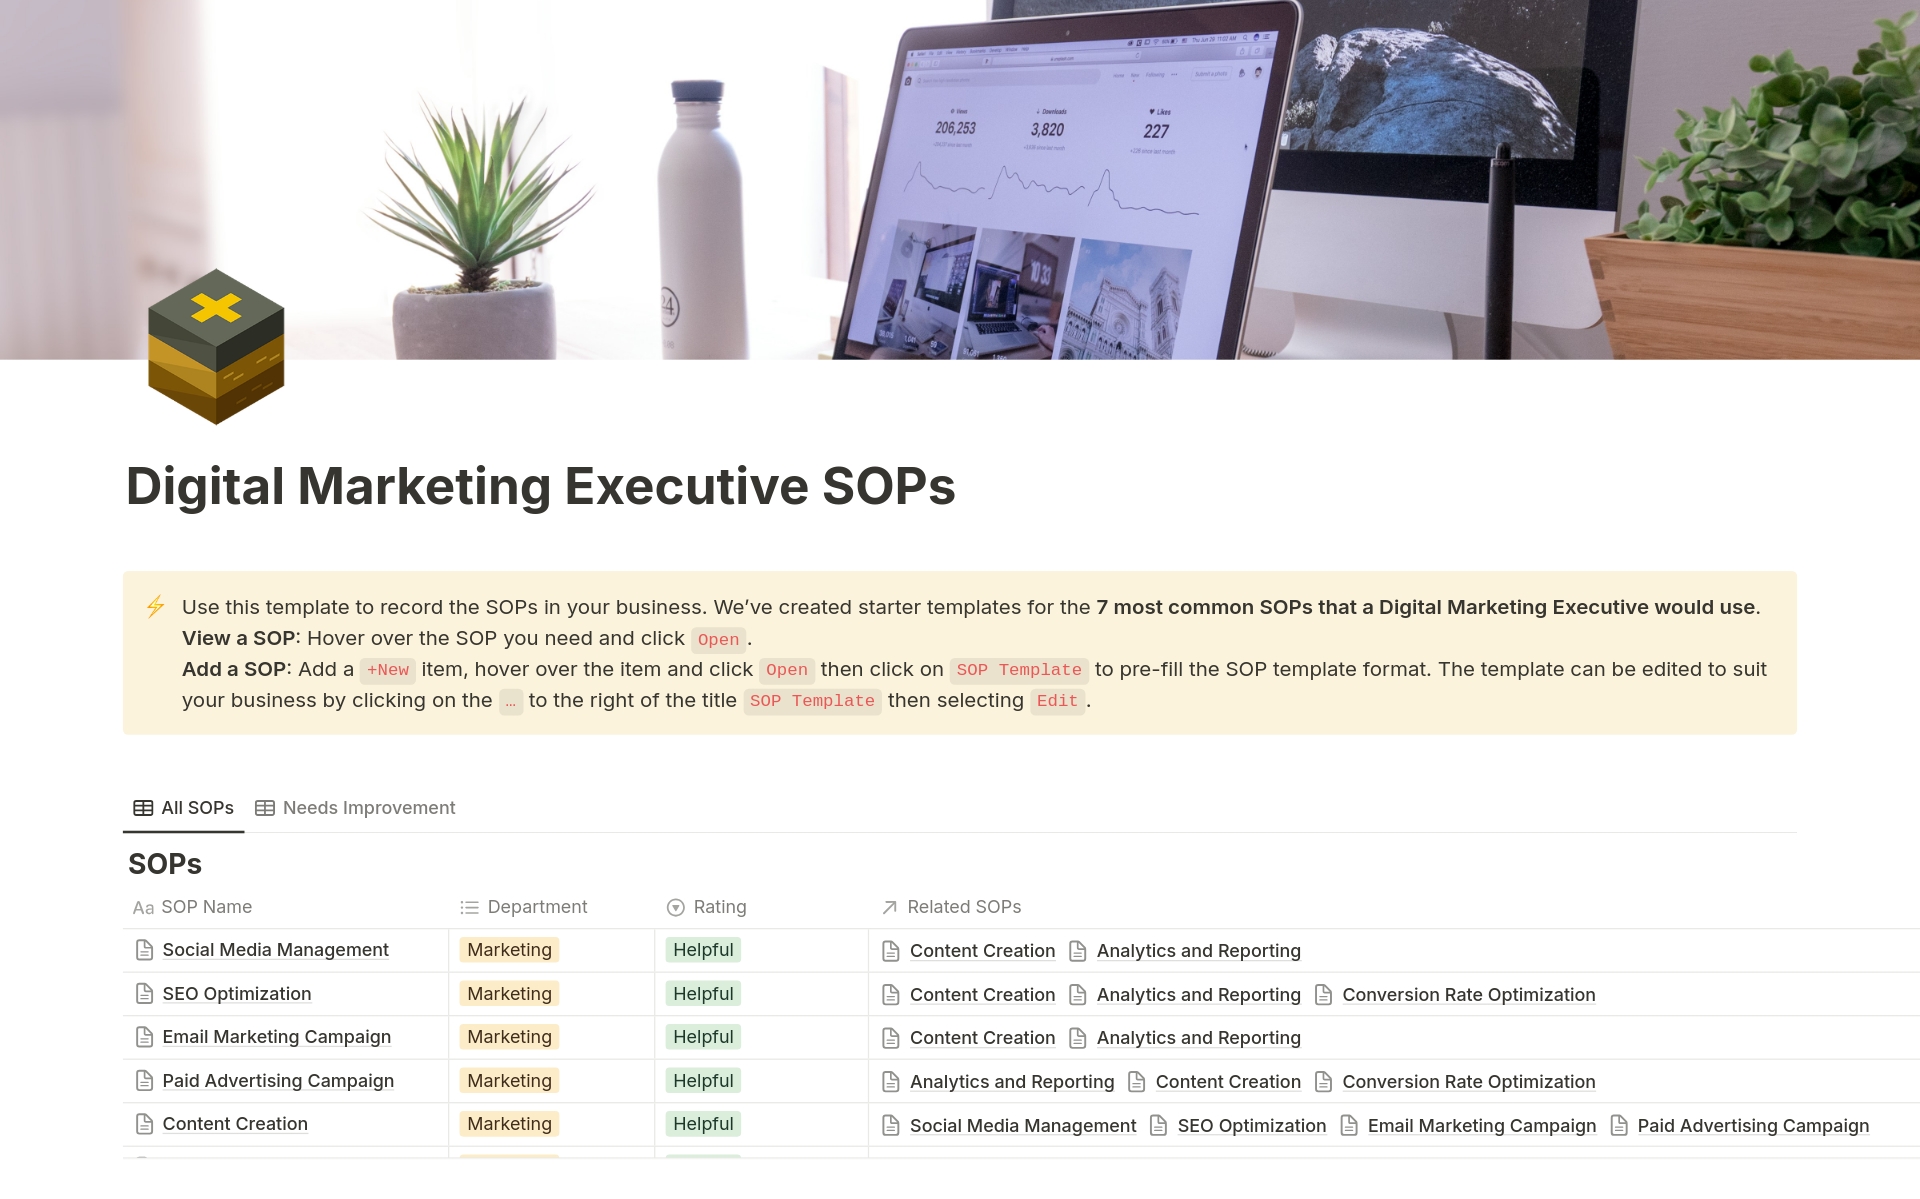 This template contains the standard operating procedures (SOPs) for various digital marketing activities. It covers social media management, SEO optimization, email marketing campaigns and more. Includes 20+ pages of best practice SOPs to save you 10+ hours of research.